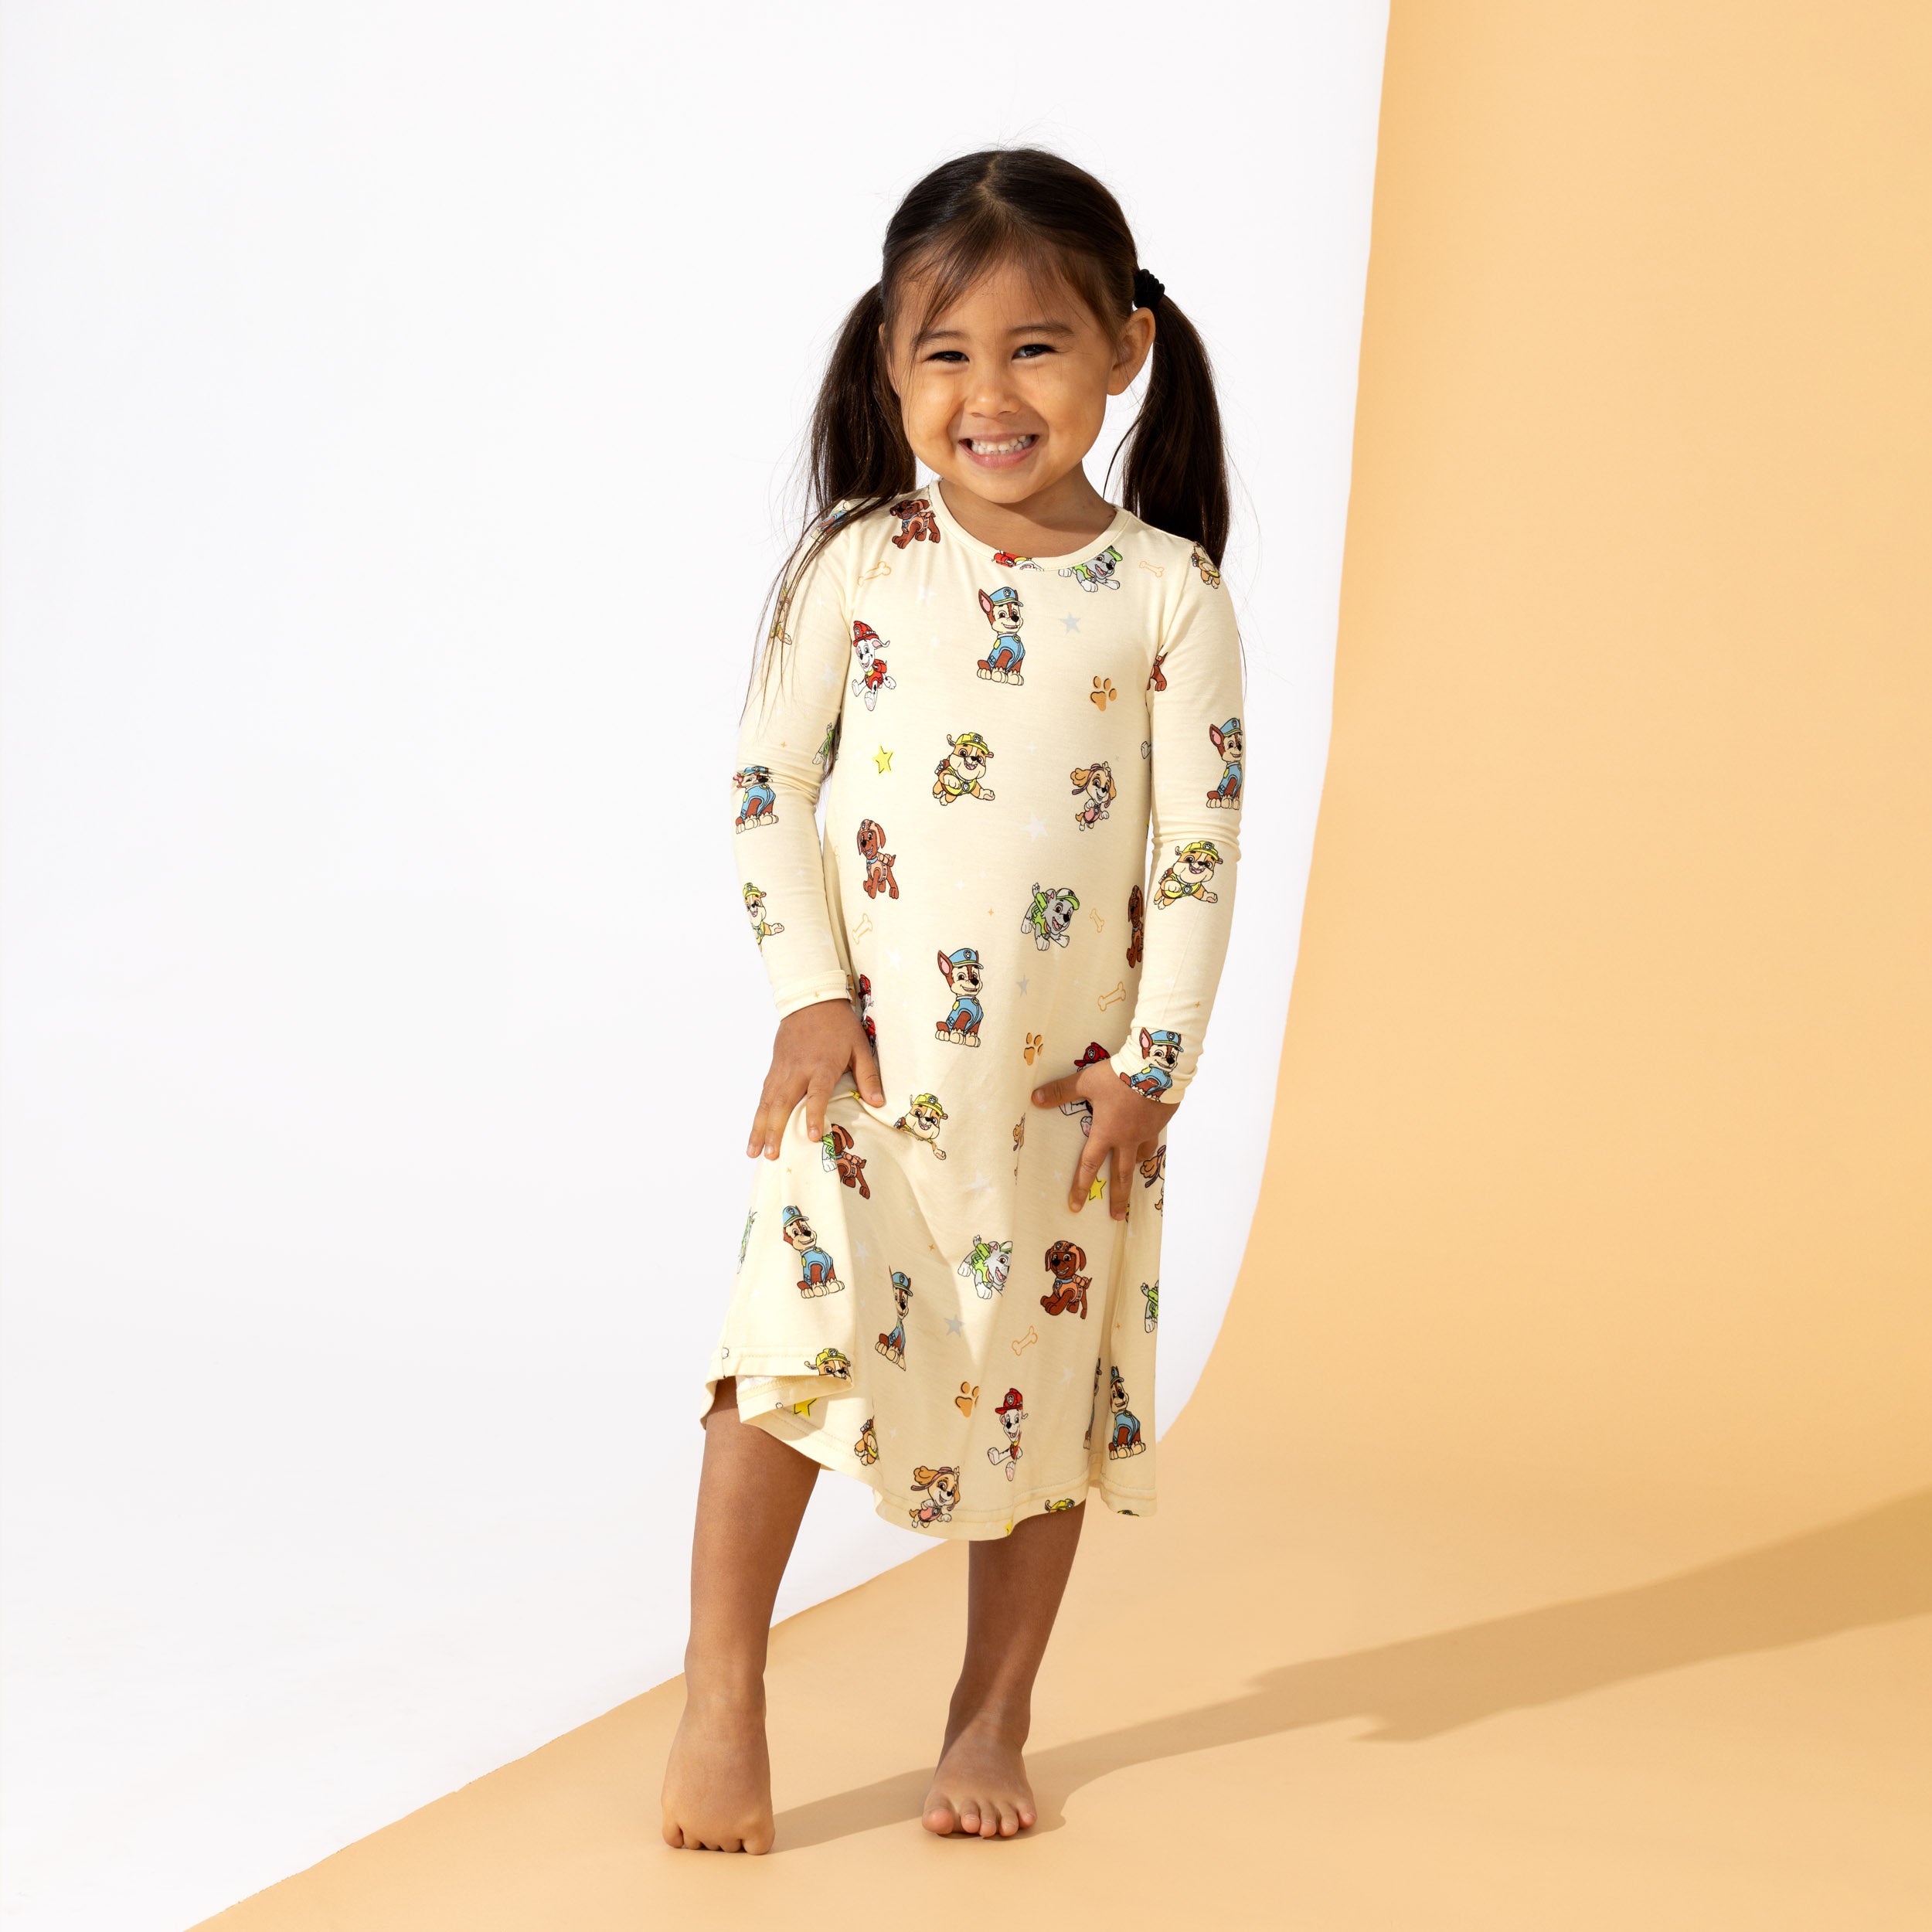 Dream in Style: Girls' Bamboo Pajama Dresses for Cozy Nights